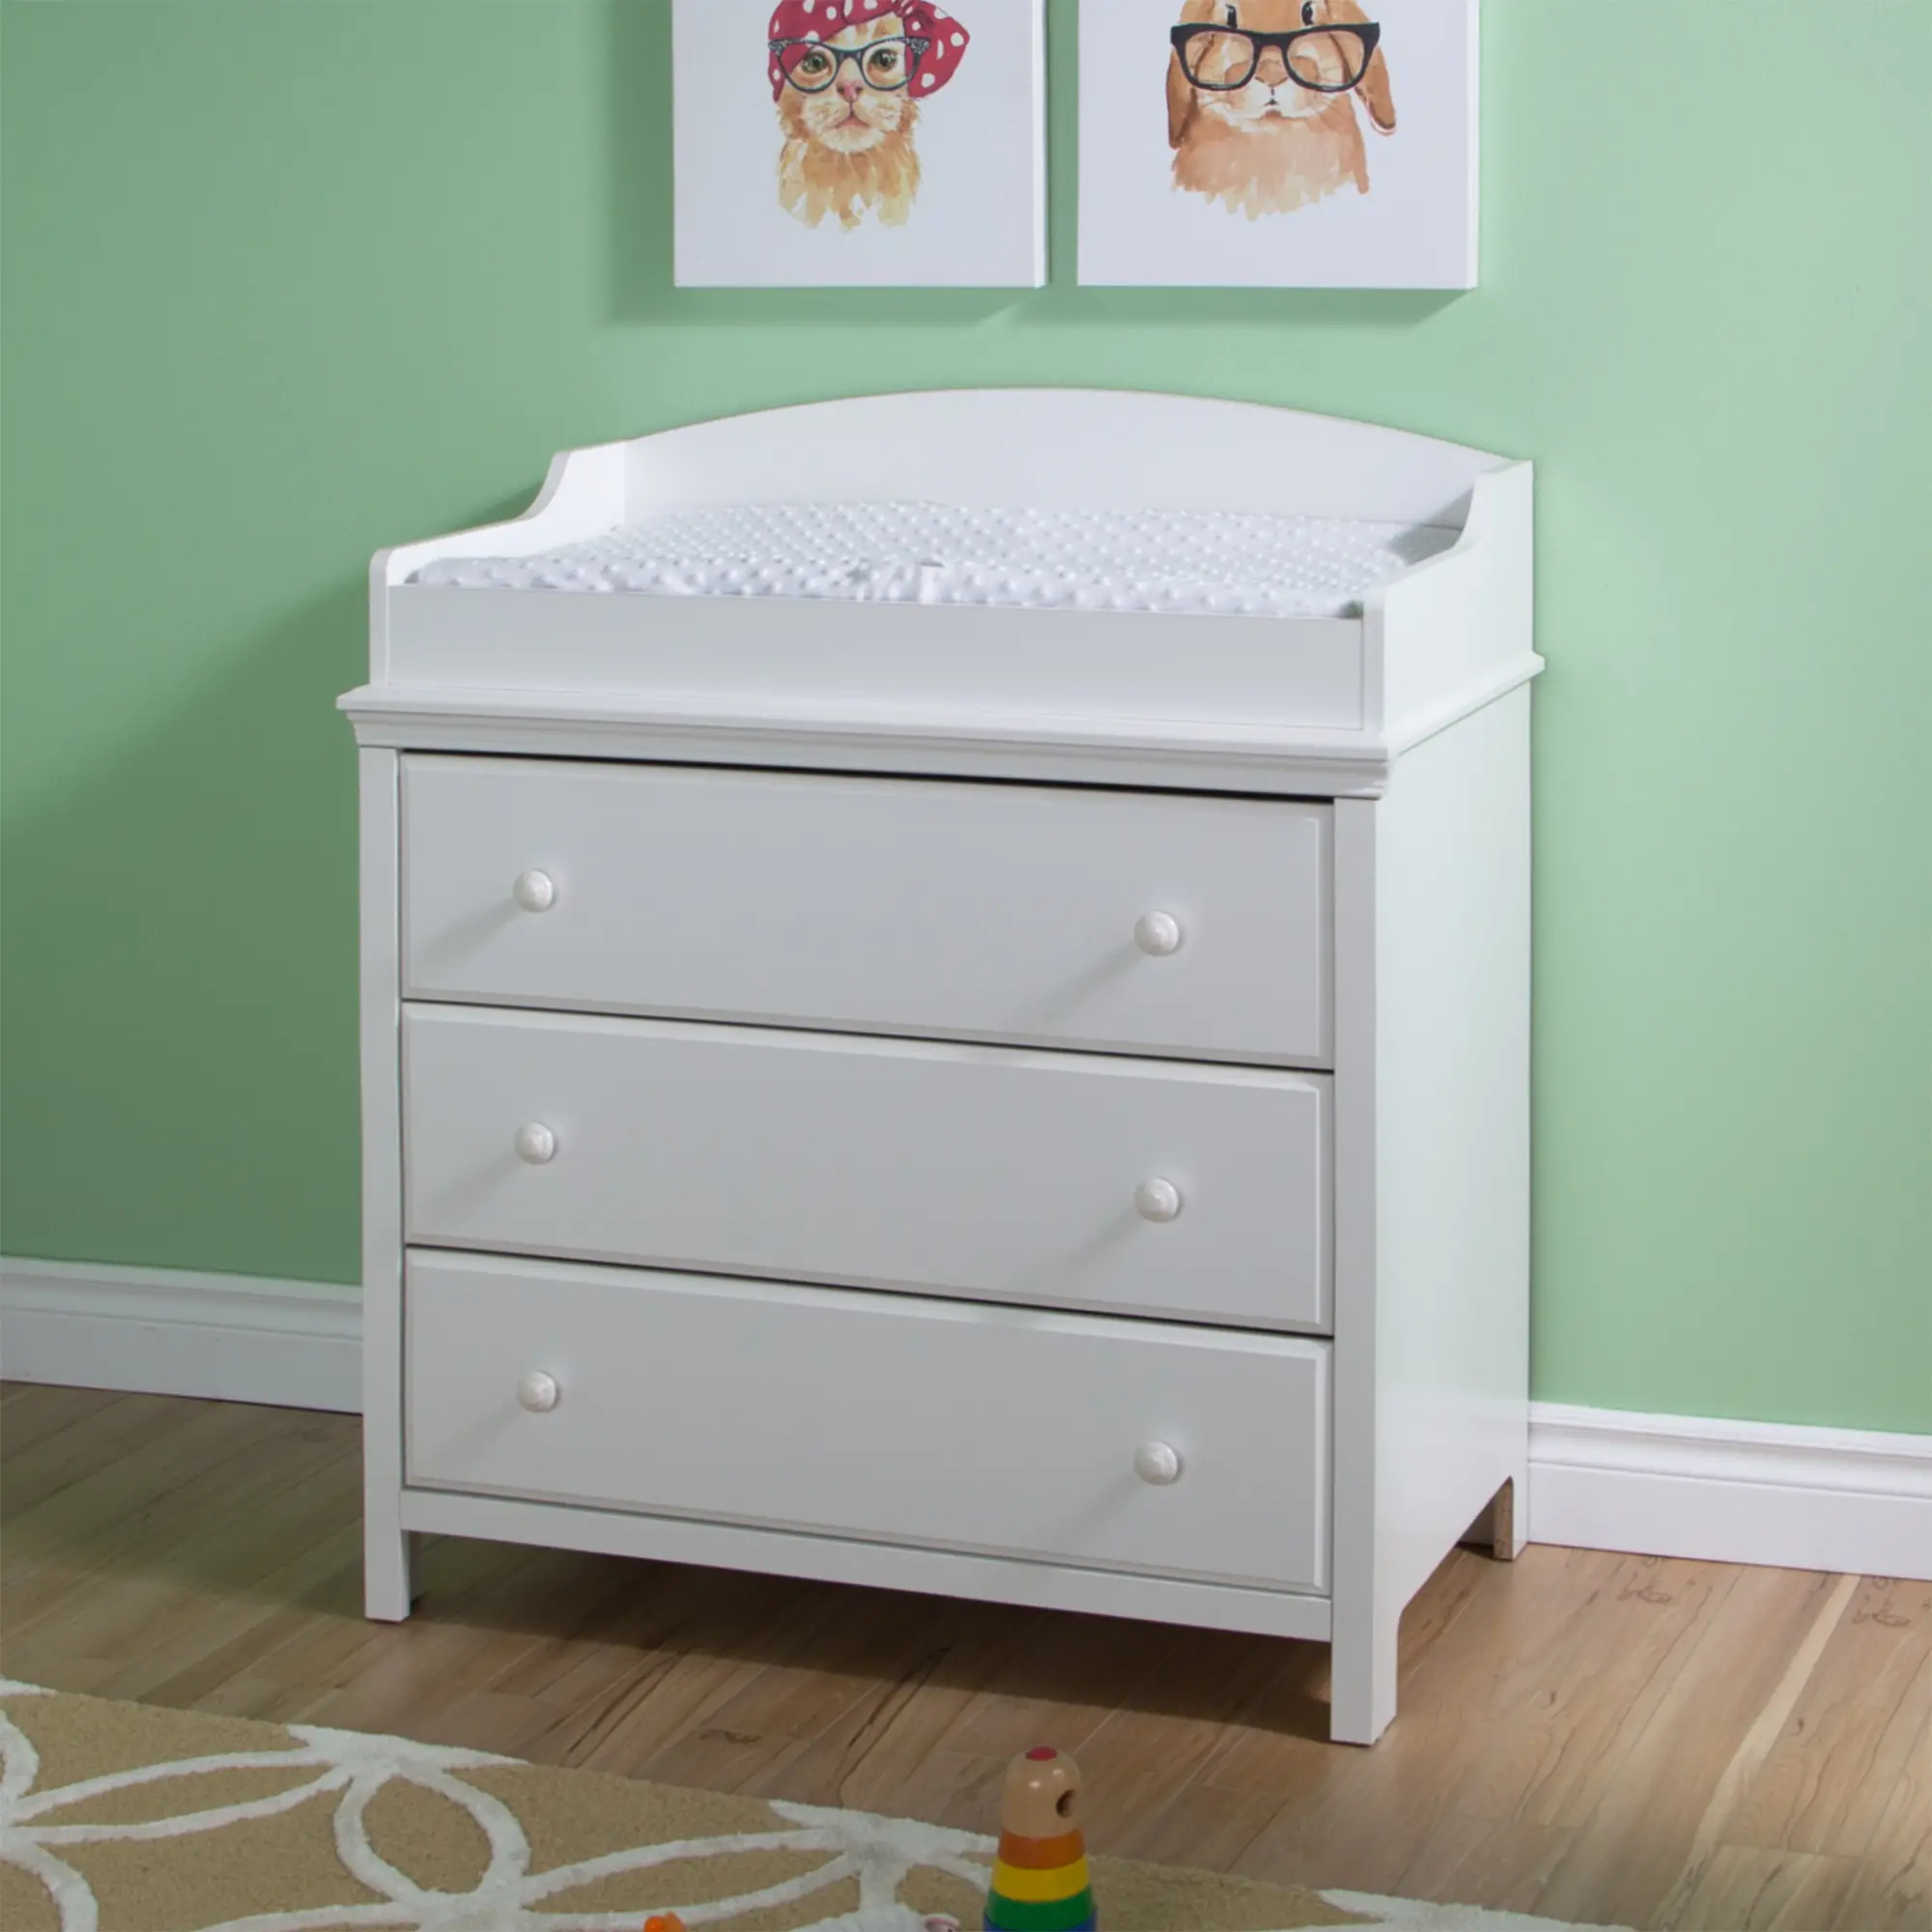 3250330 Cotton Candy White Changing Table with Drawers - S sku 3250330